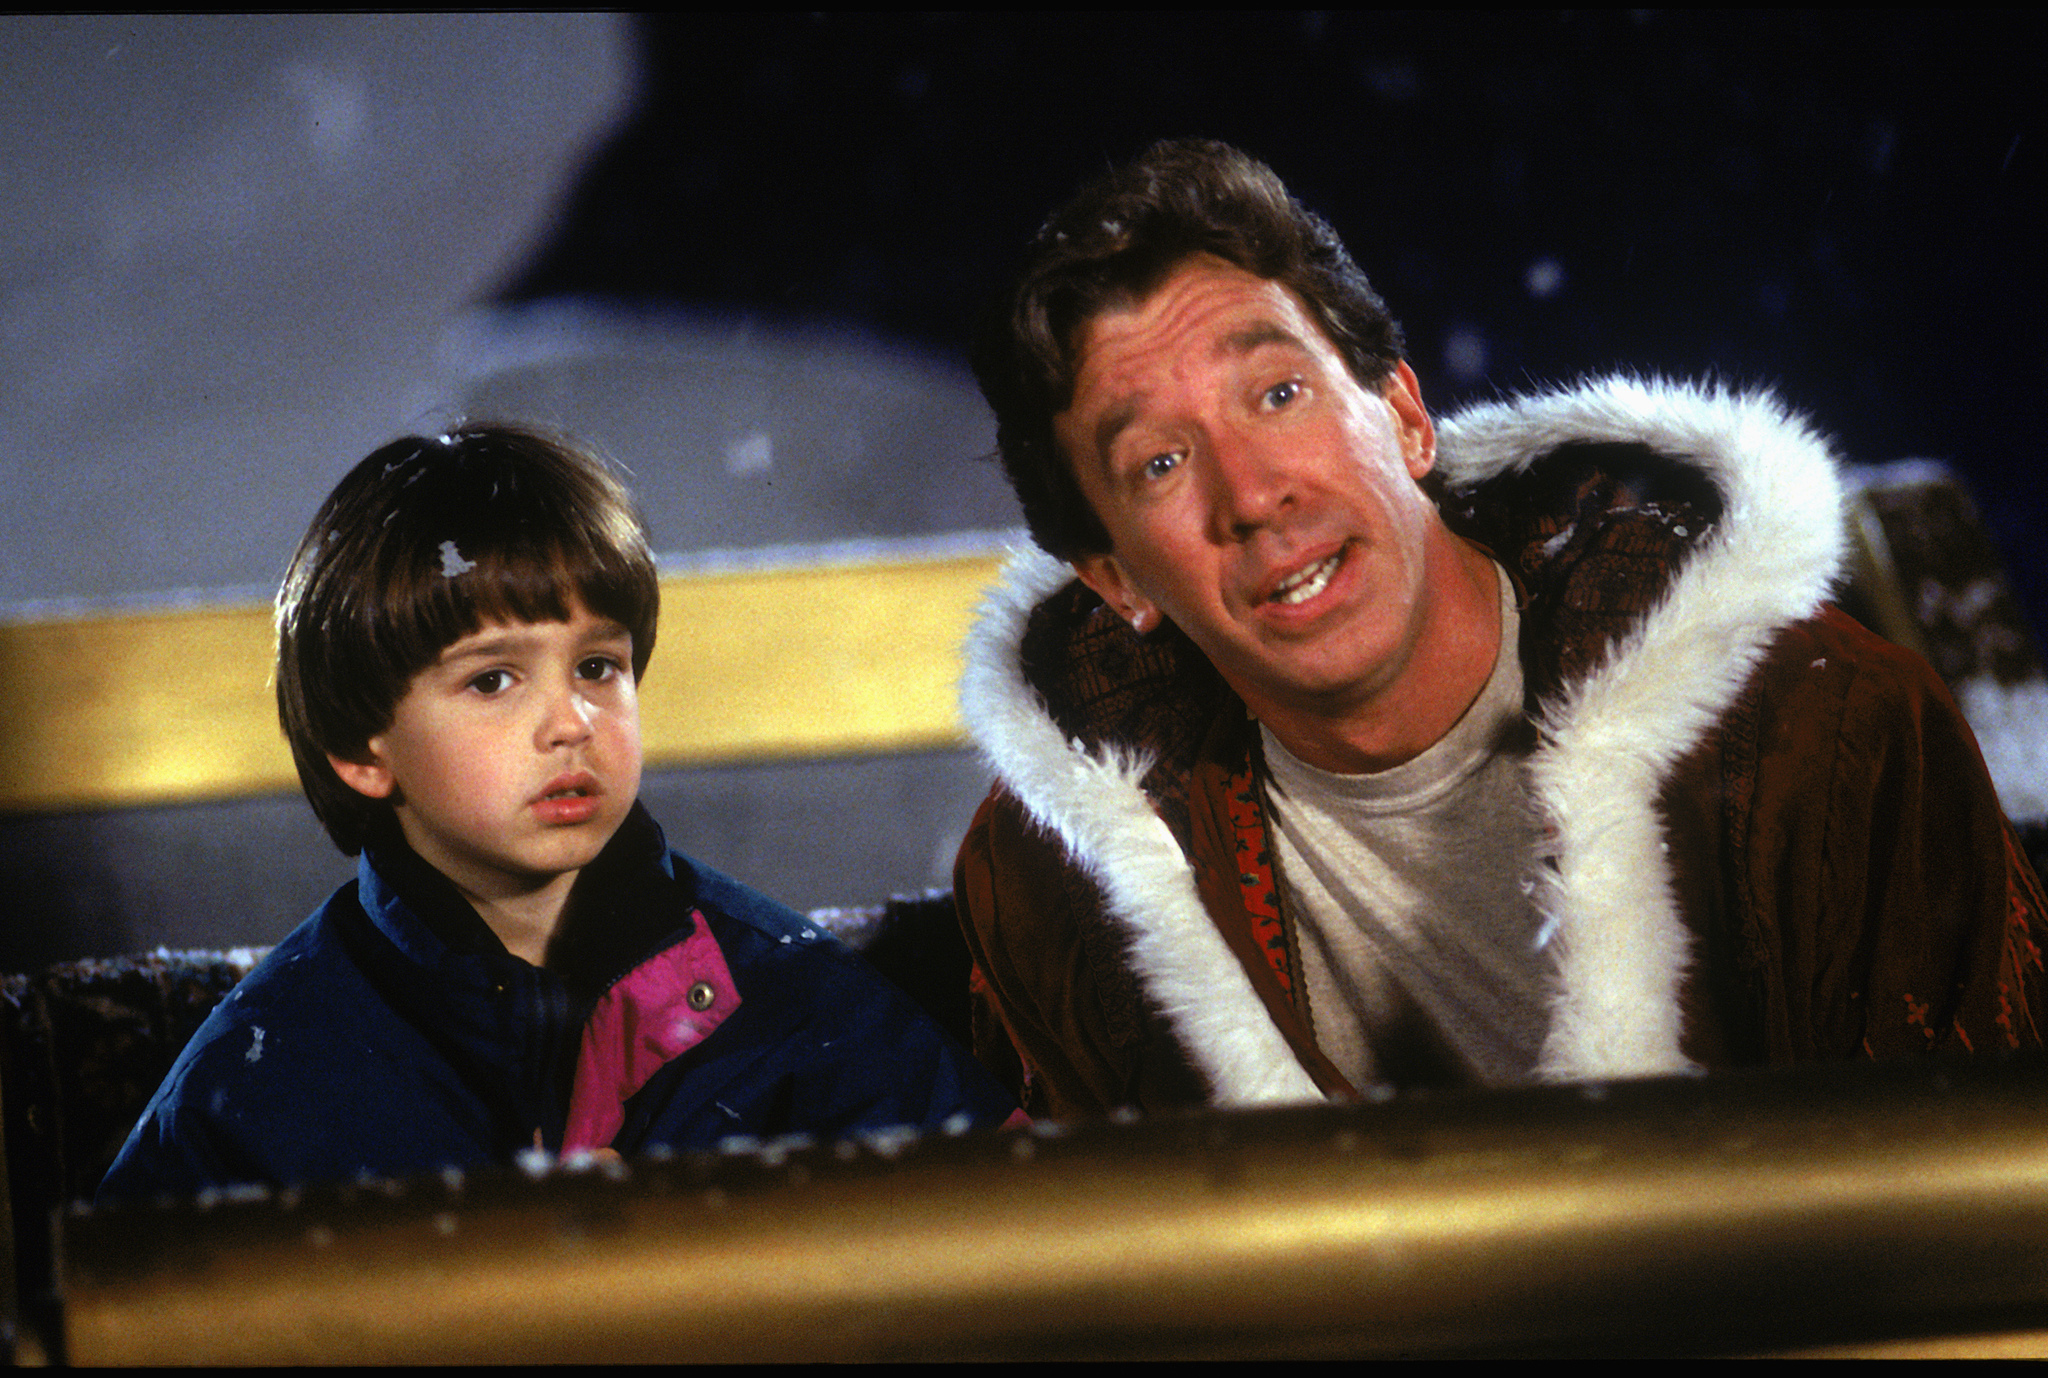 The Santa Clause Photo Gallery